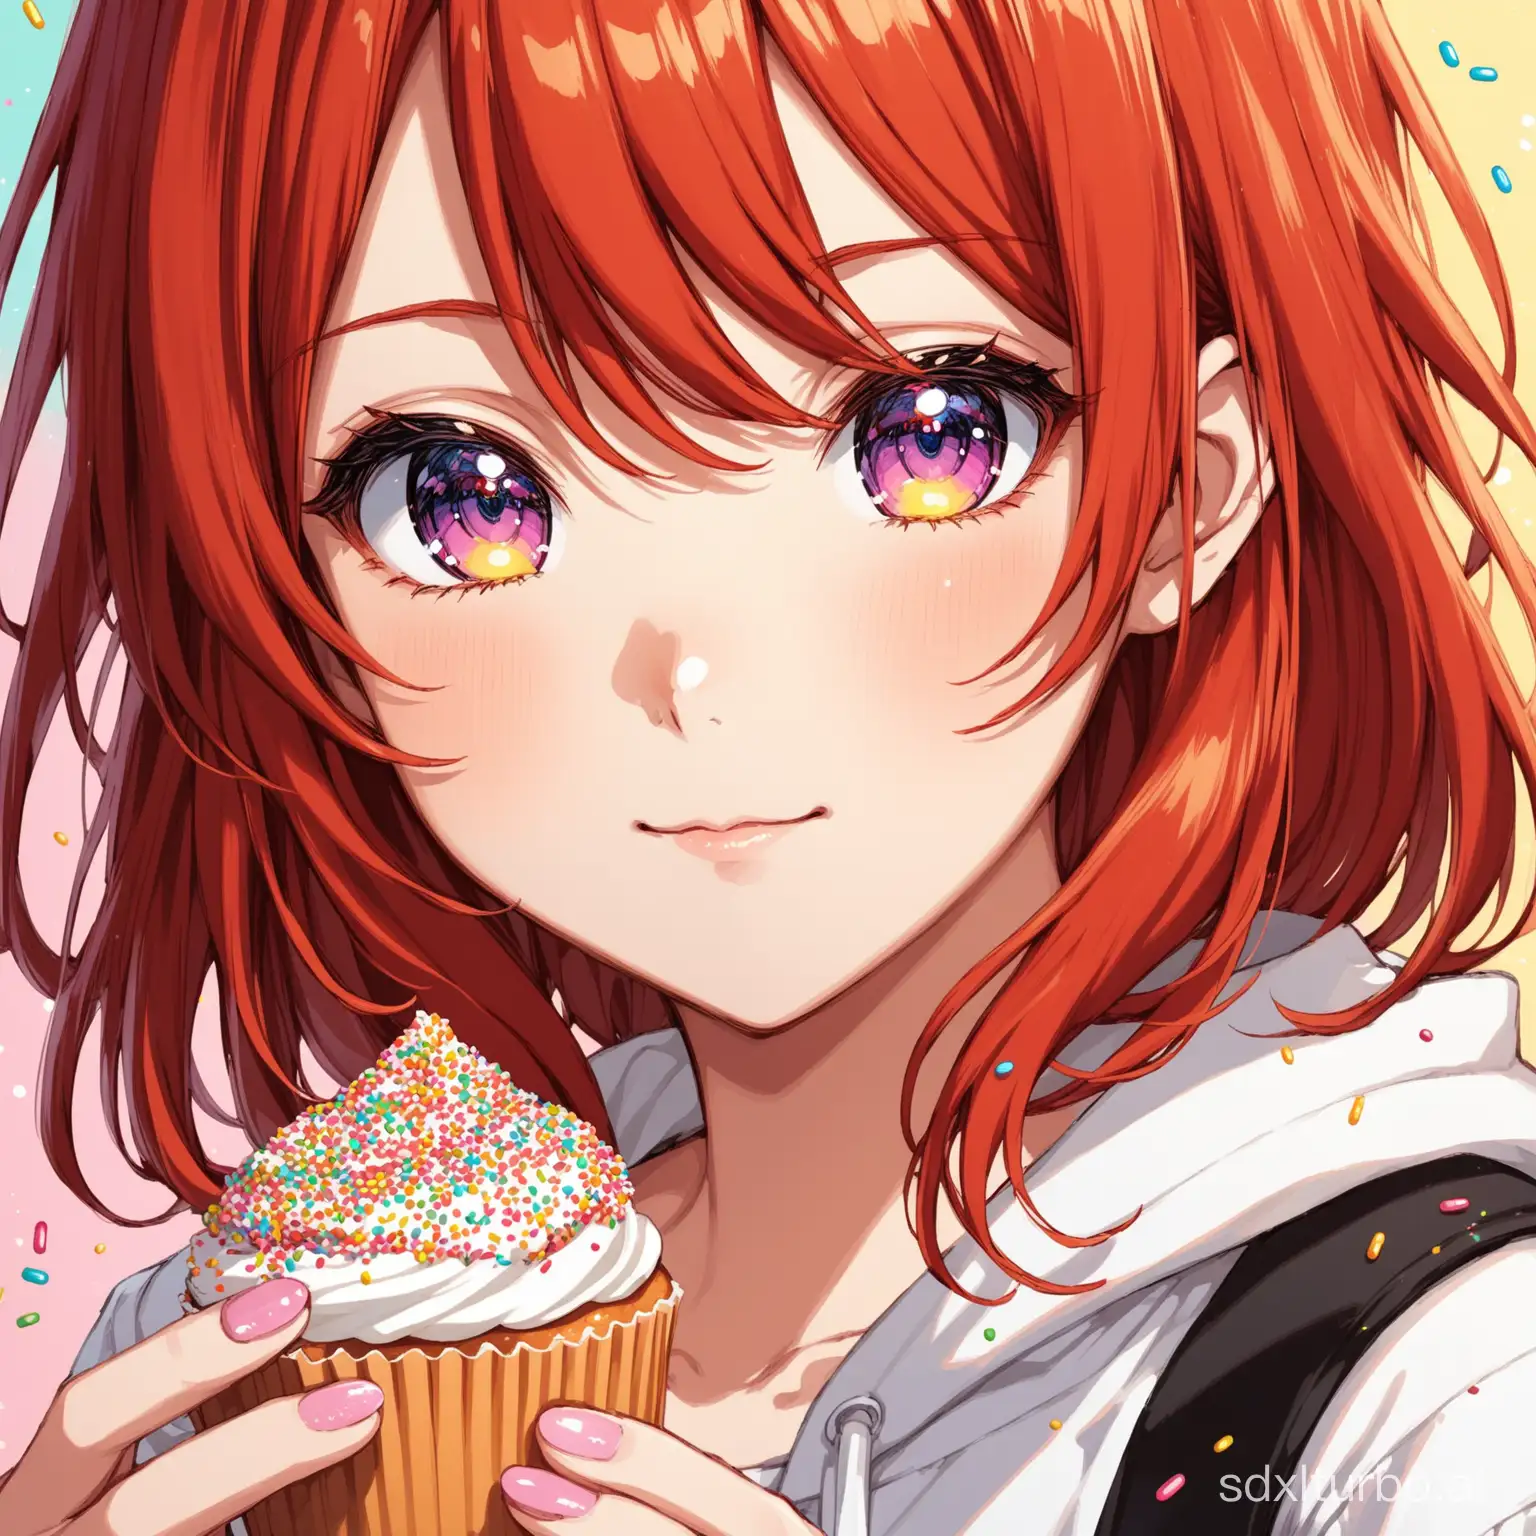 Vibrant-Redhead-Anime-Girl-with-Sprinkles-Portrait